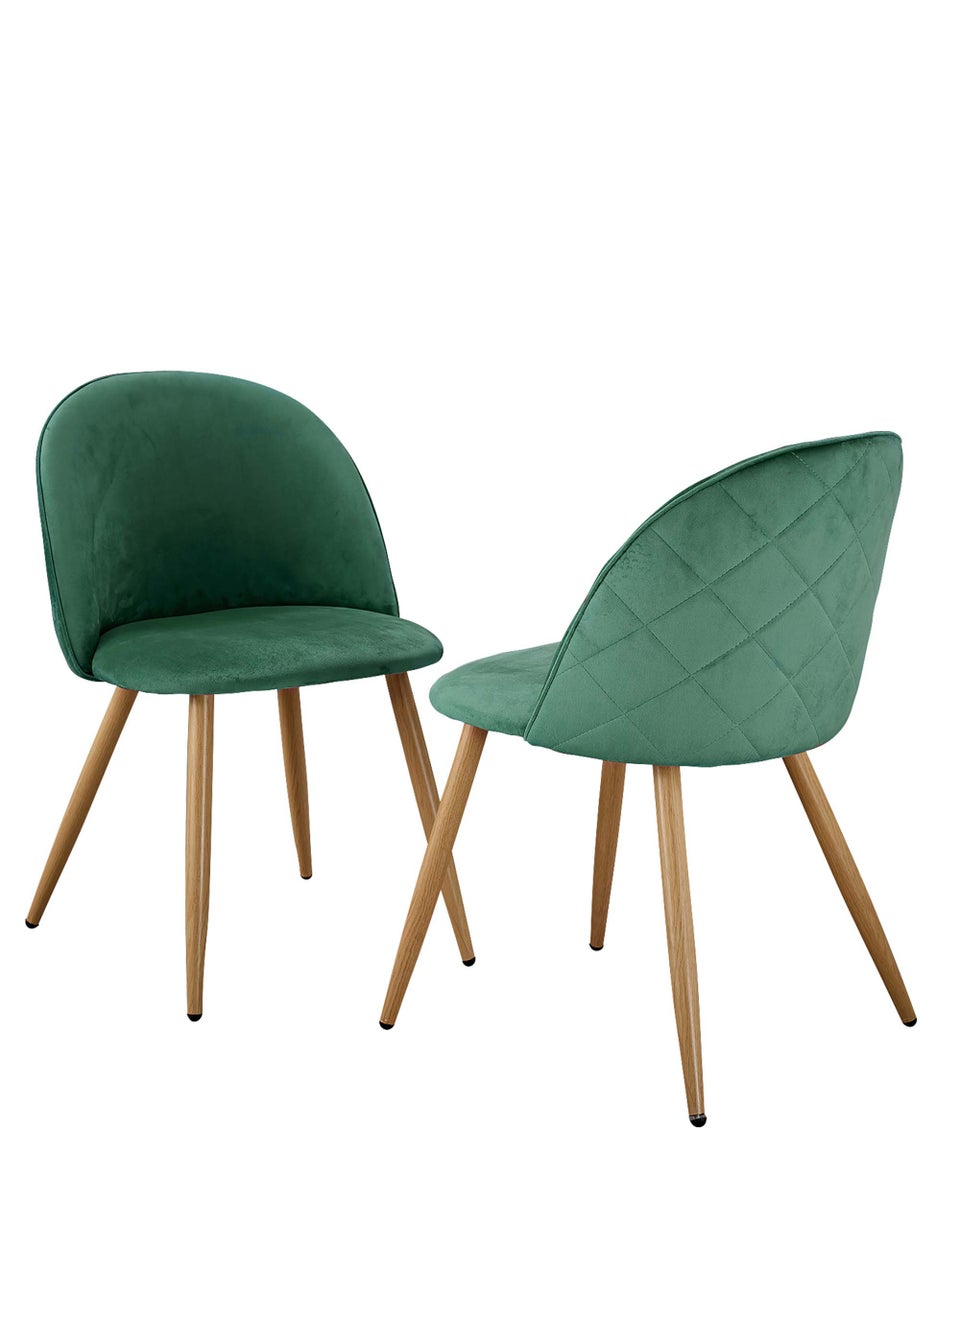 LPD Furniture Set of 2 Venice Dining Chairs Green (780x550x510mm)